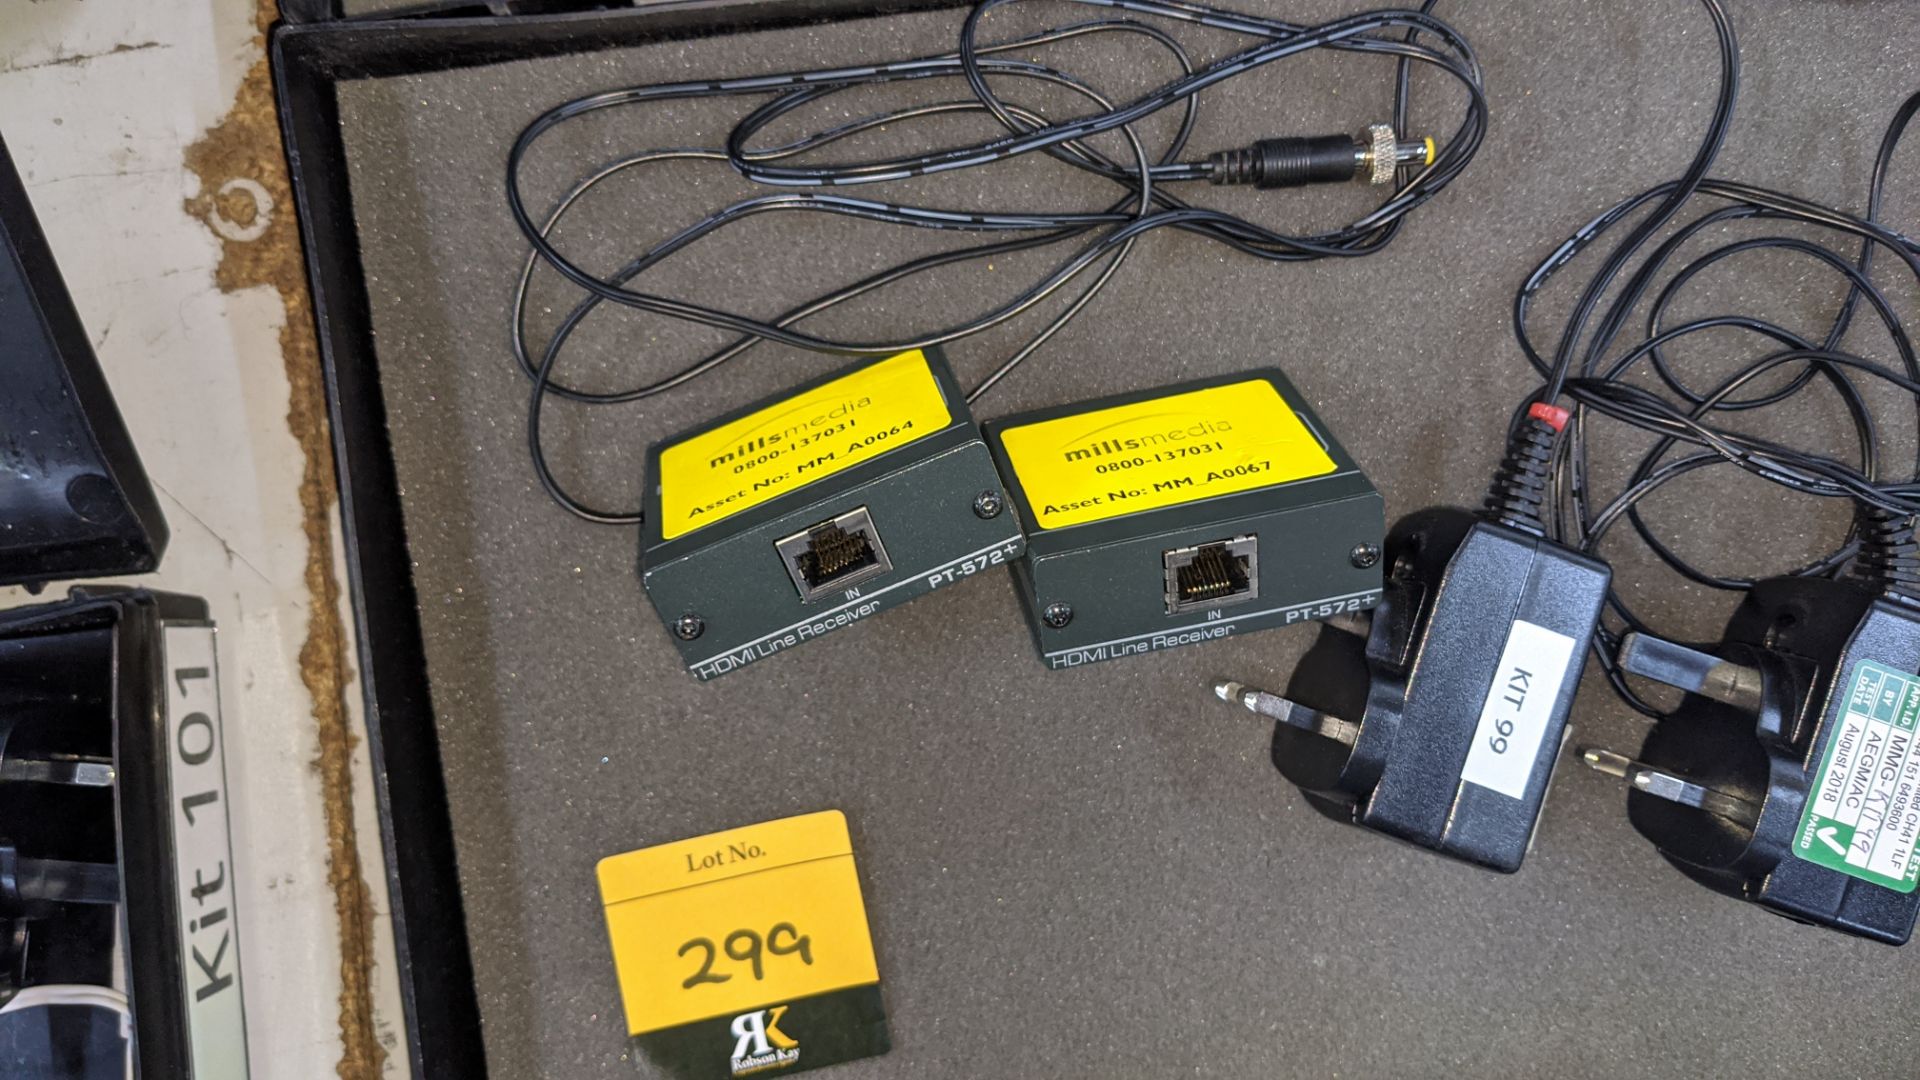 Pair of Kramer model PT-572+ HDMI units each with power pack plus carry case Lots 51 - 480 - Image 2 of 7